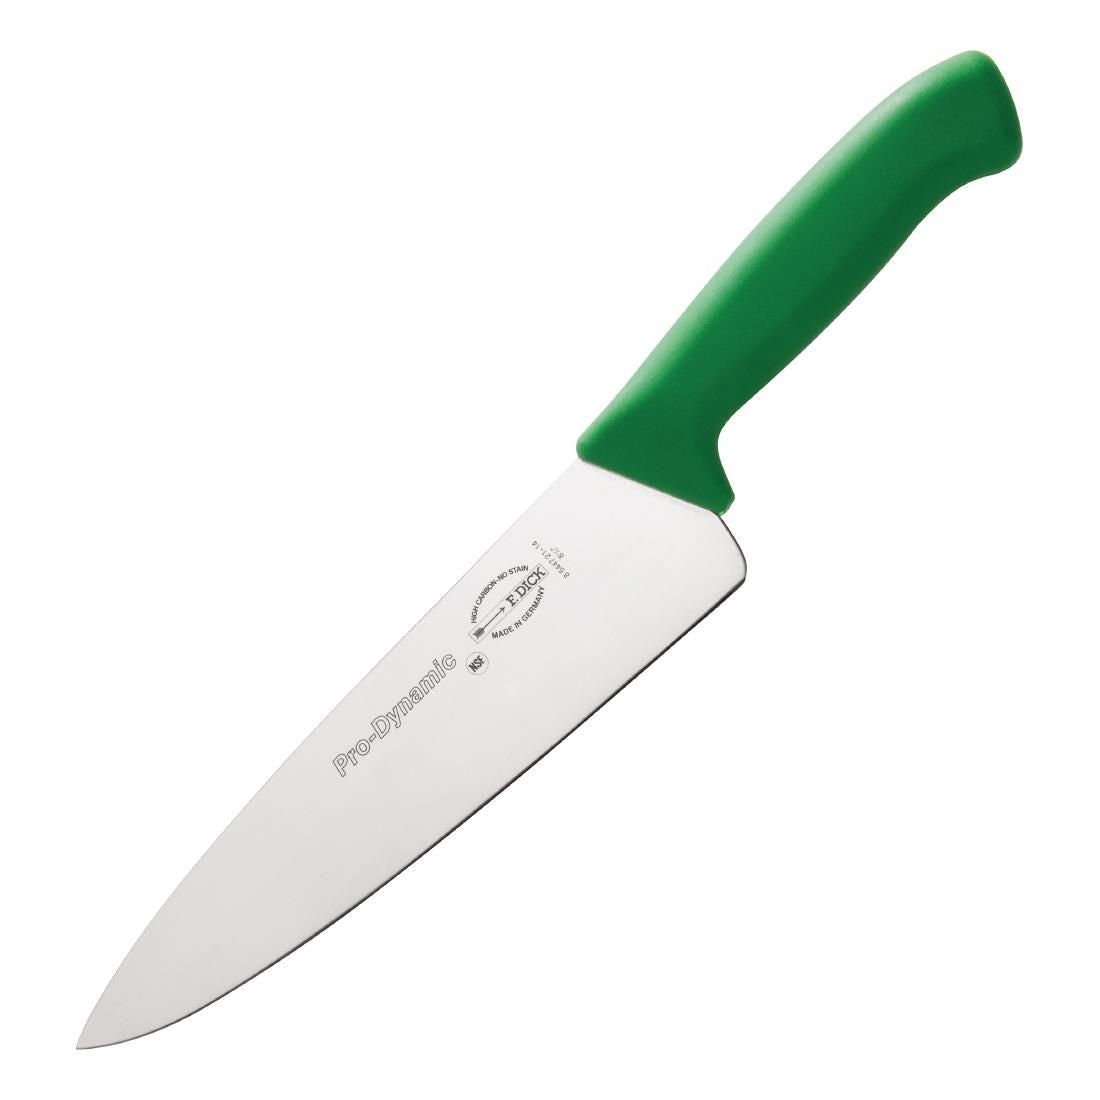 DL365 Dick Pro Dynamic HACCP Chefs Knife Green 21.5cm JD Catering Equipment Solutions Ltd